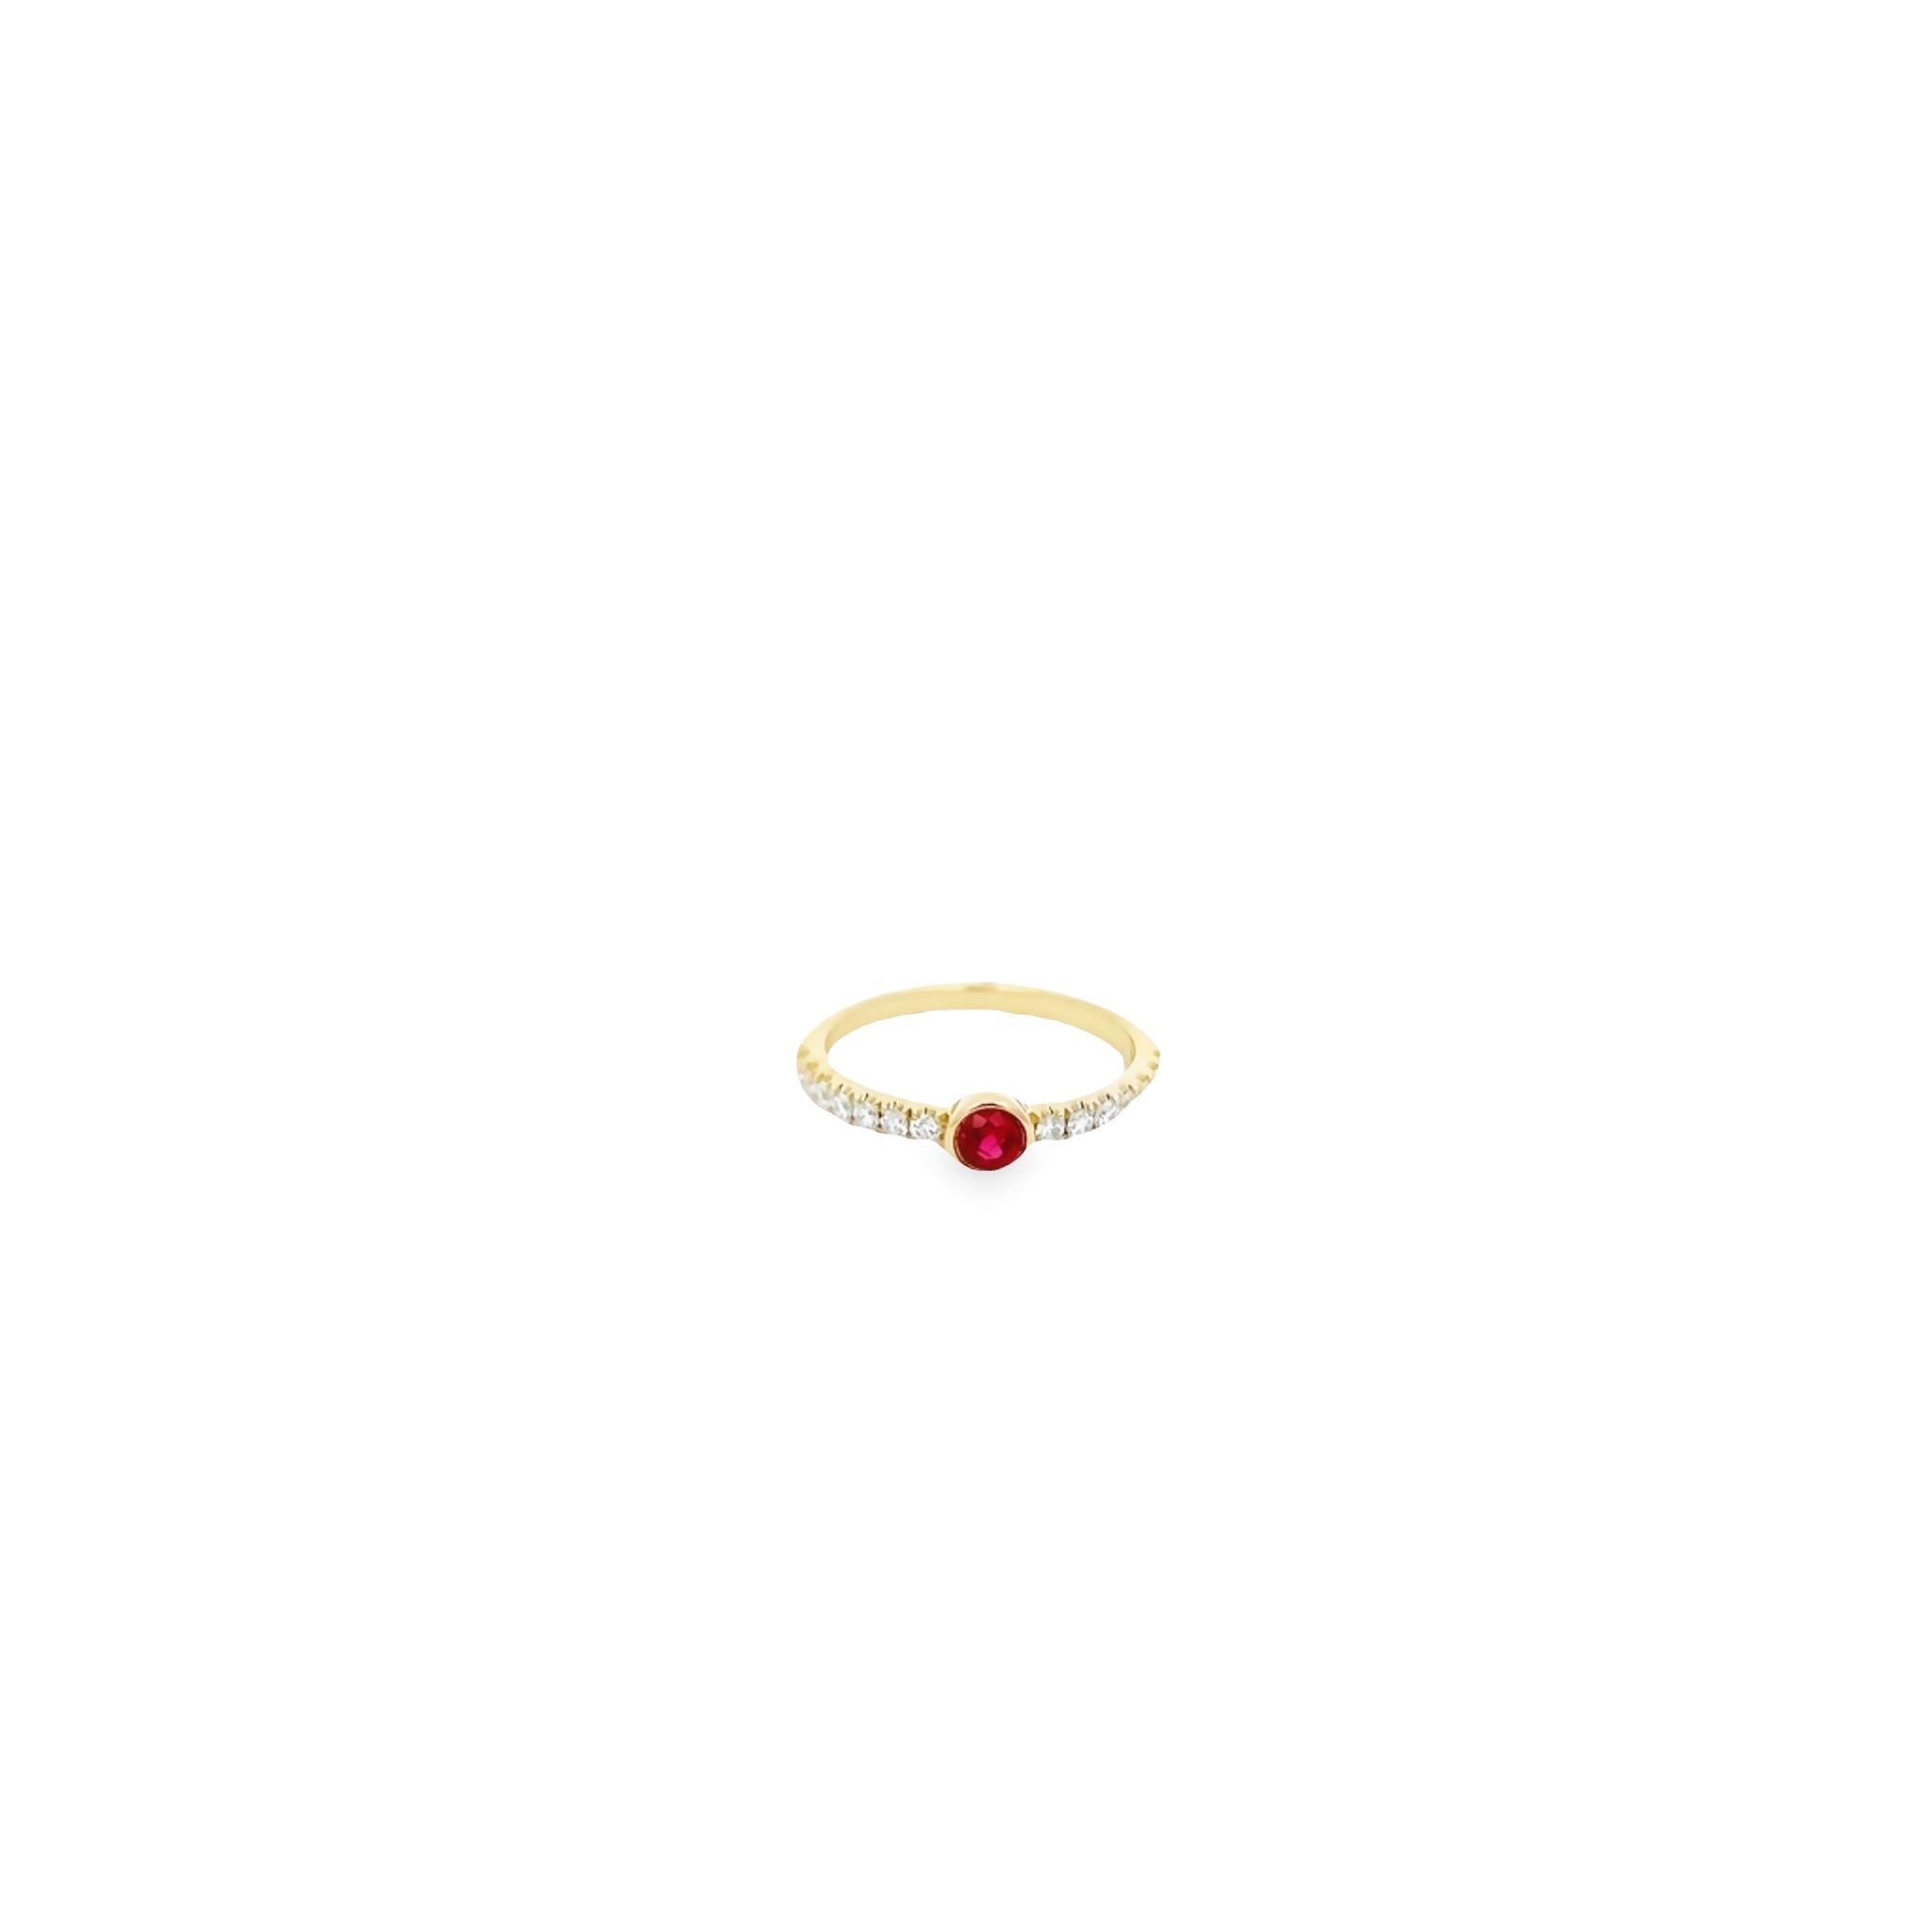 14 Karat Yellow Gold Ring With One 0.26ct Round Mixed Cut Ruby And 14=0.27 Total Weight Round Brilliant G Vs Diamonds. Size 6.5